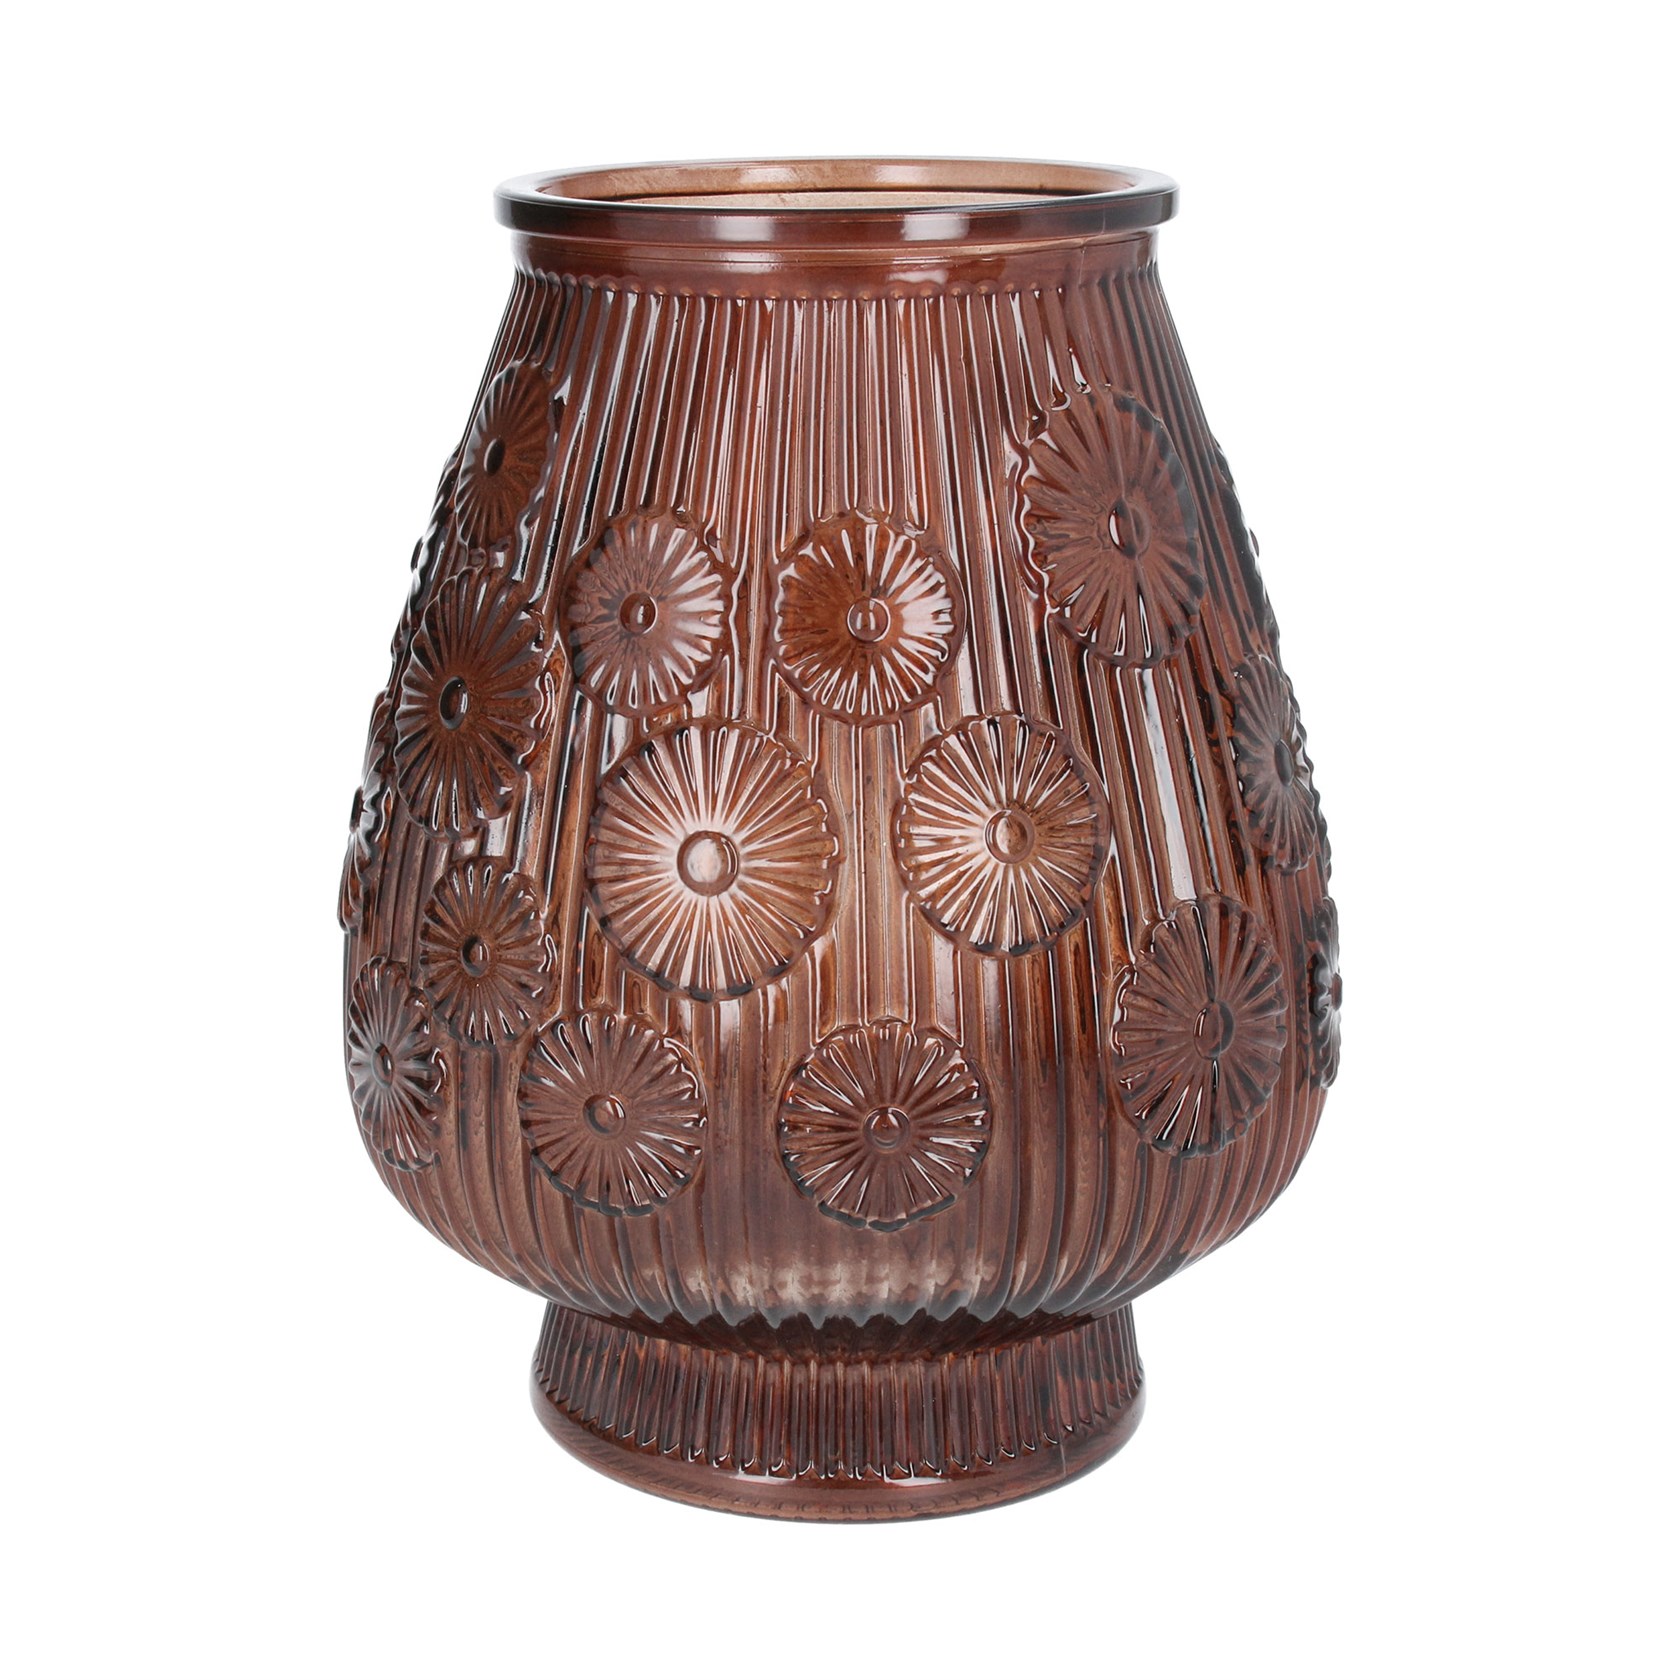 A large dark amber coloured glass vase with all over floral design. The perfect addition to your home or the perfect gift for yourself or a loved one. By London Designer Gisela Graham.